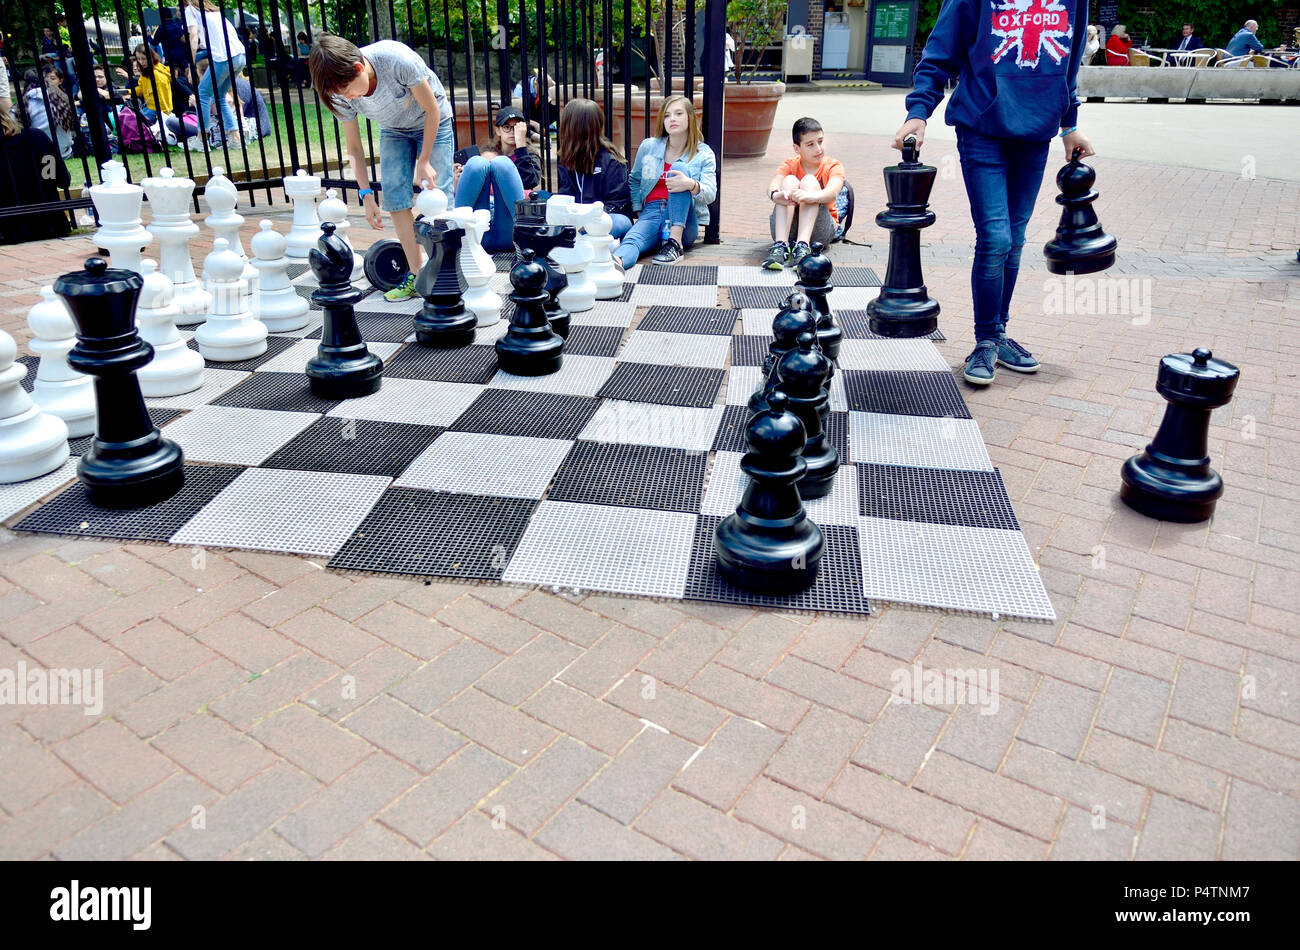 Children playing giant outdoor chess in Victoria Embankment Gardens, London, England, UK. Stock Photo